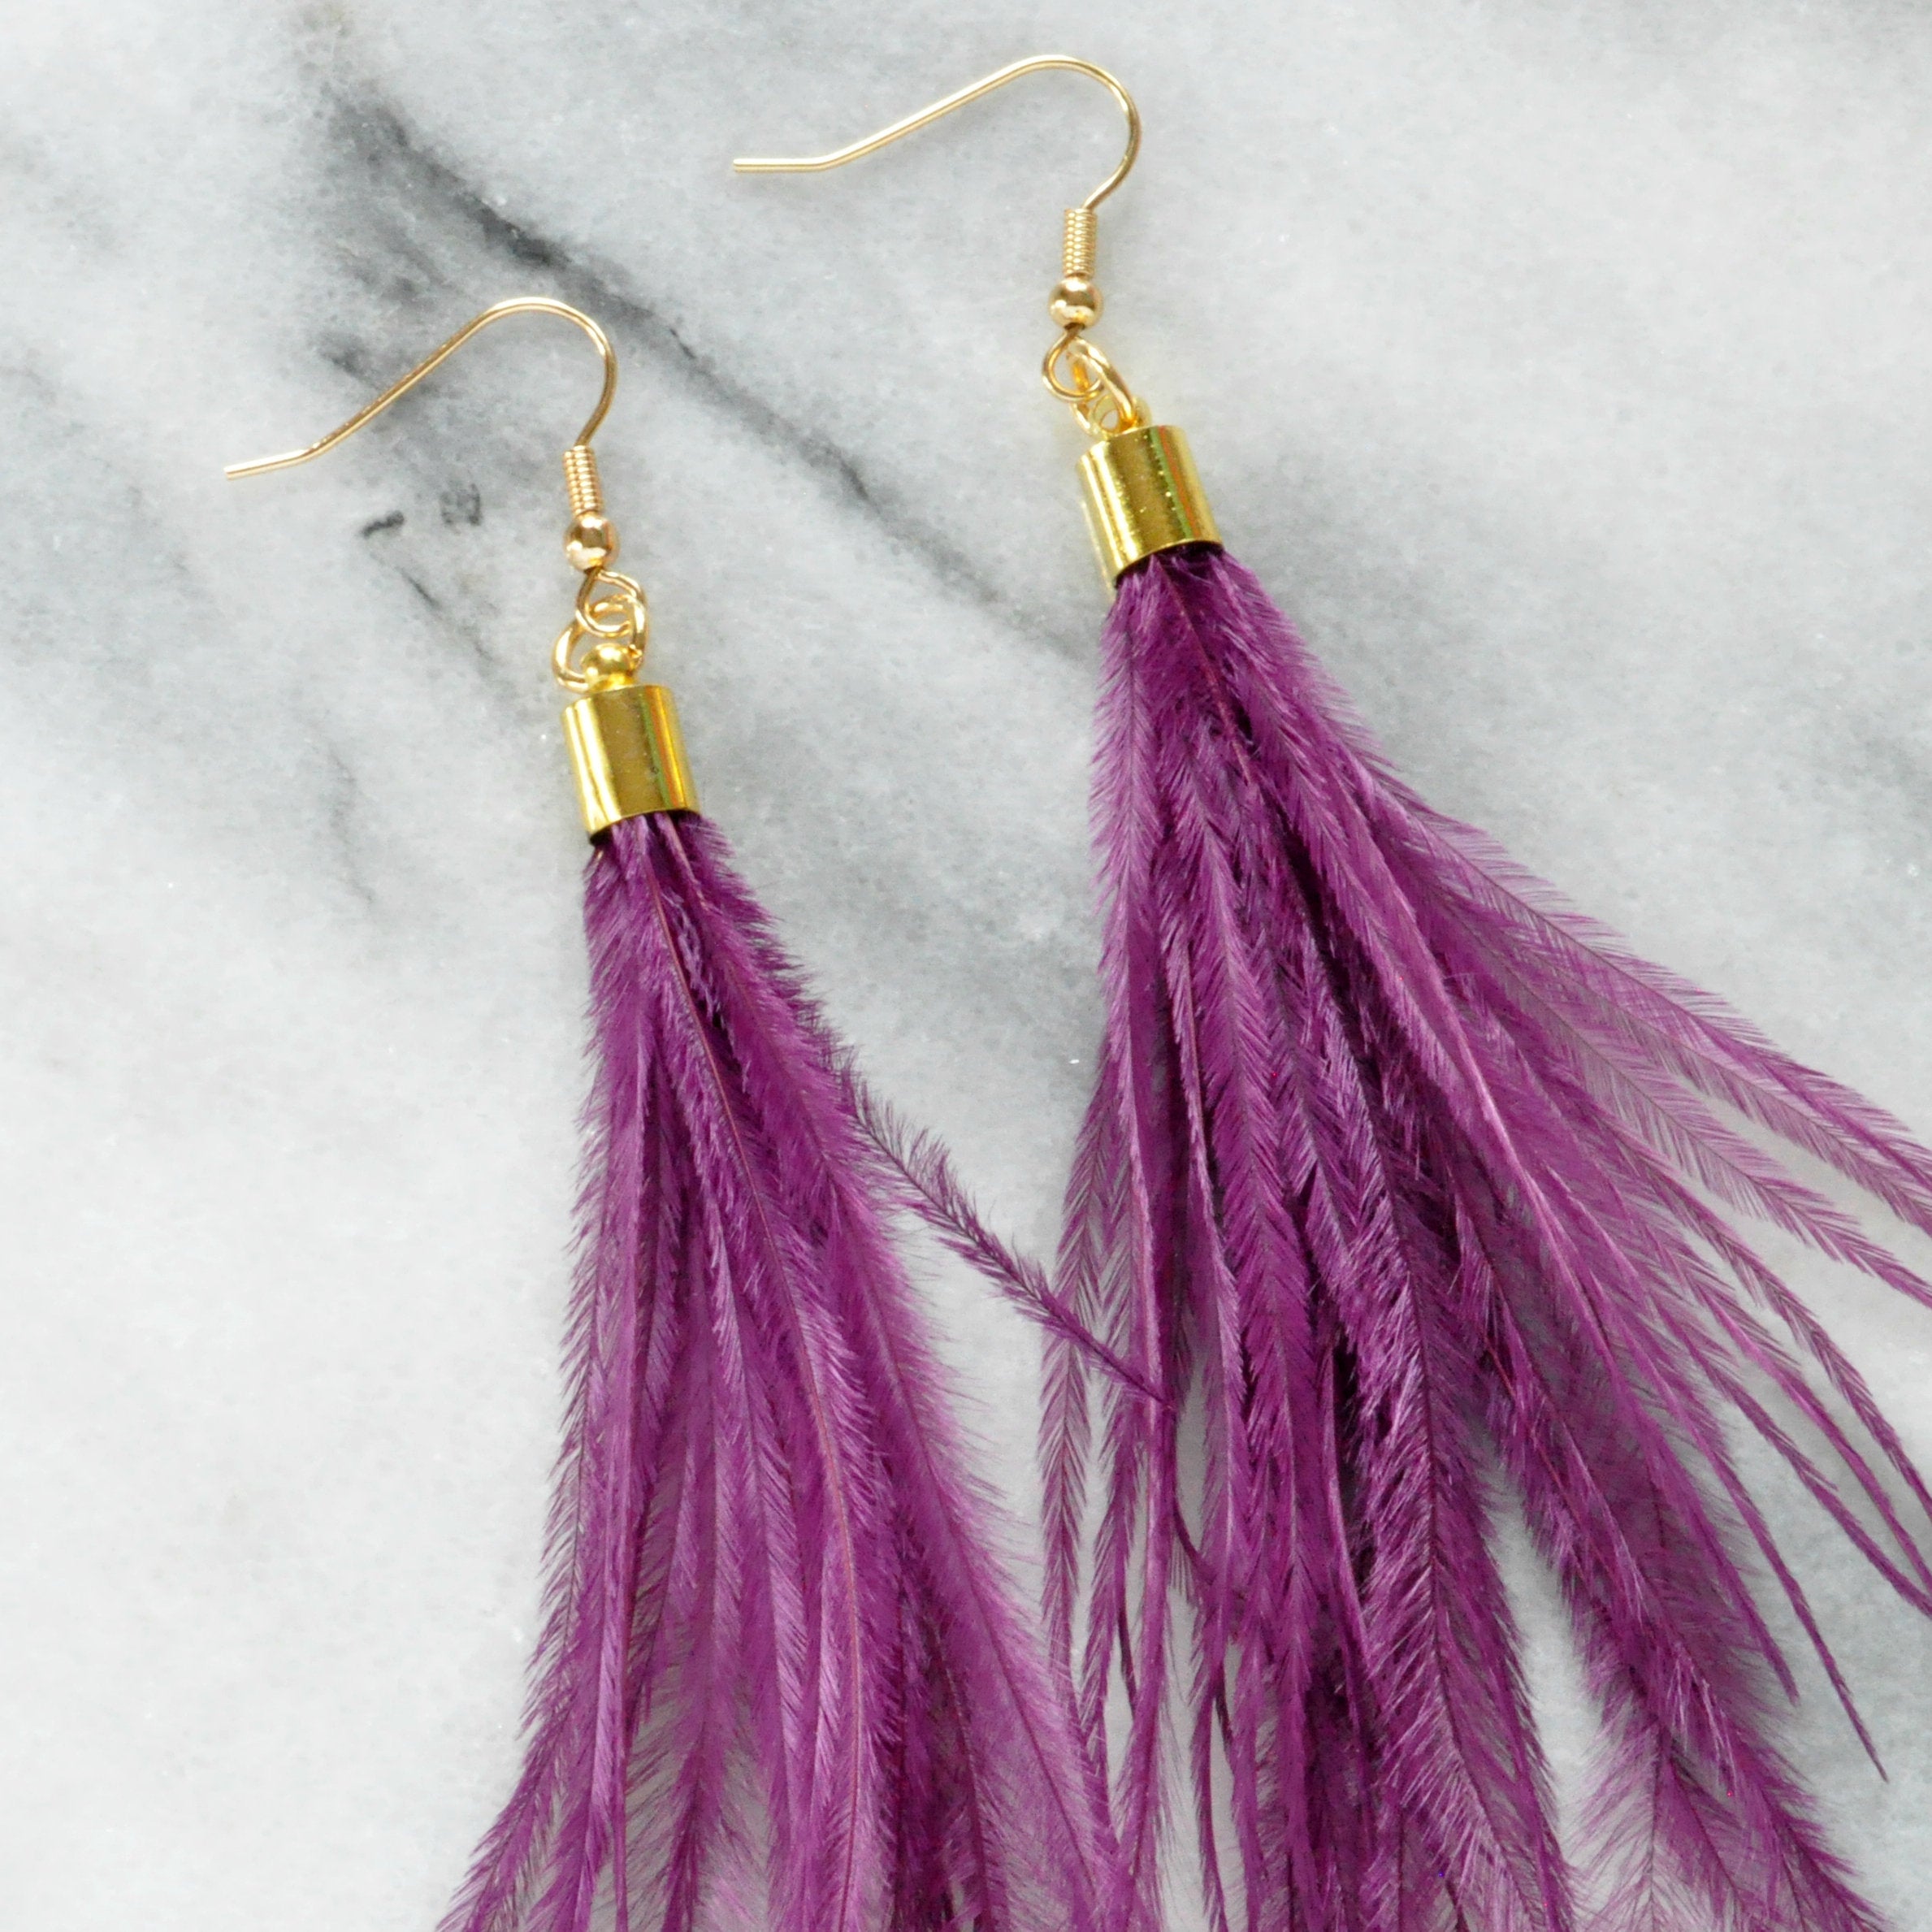 Libby & Smee Purple Feather Earrings with Ostrich feathers and gold caps, still life close up